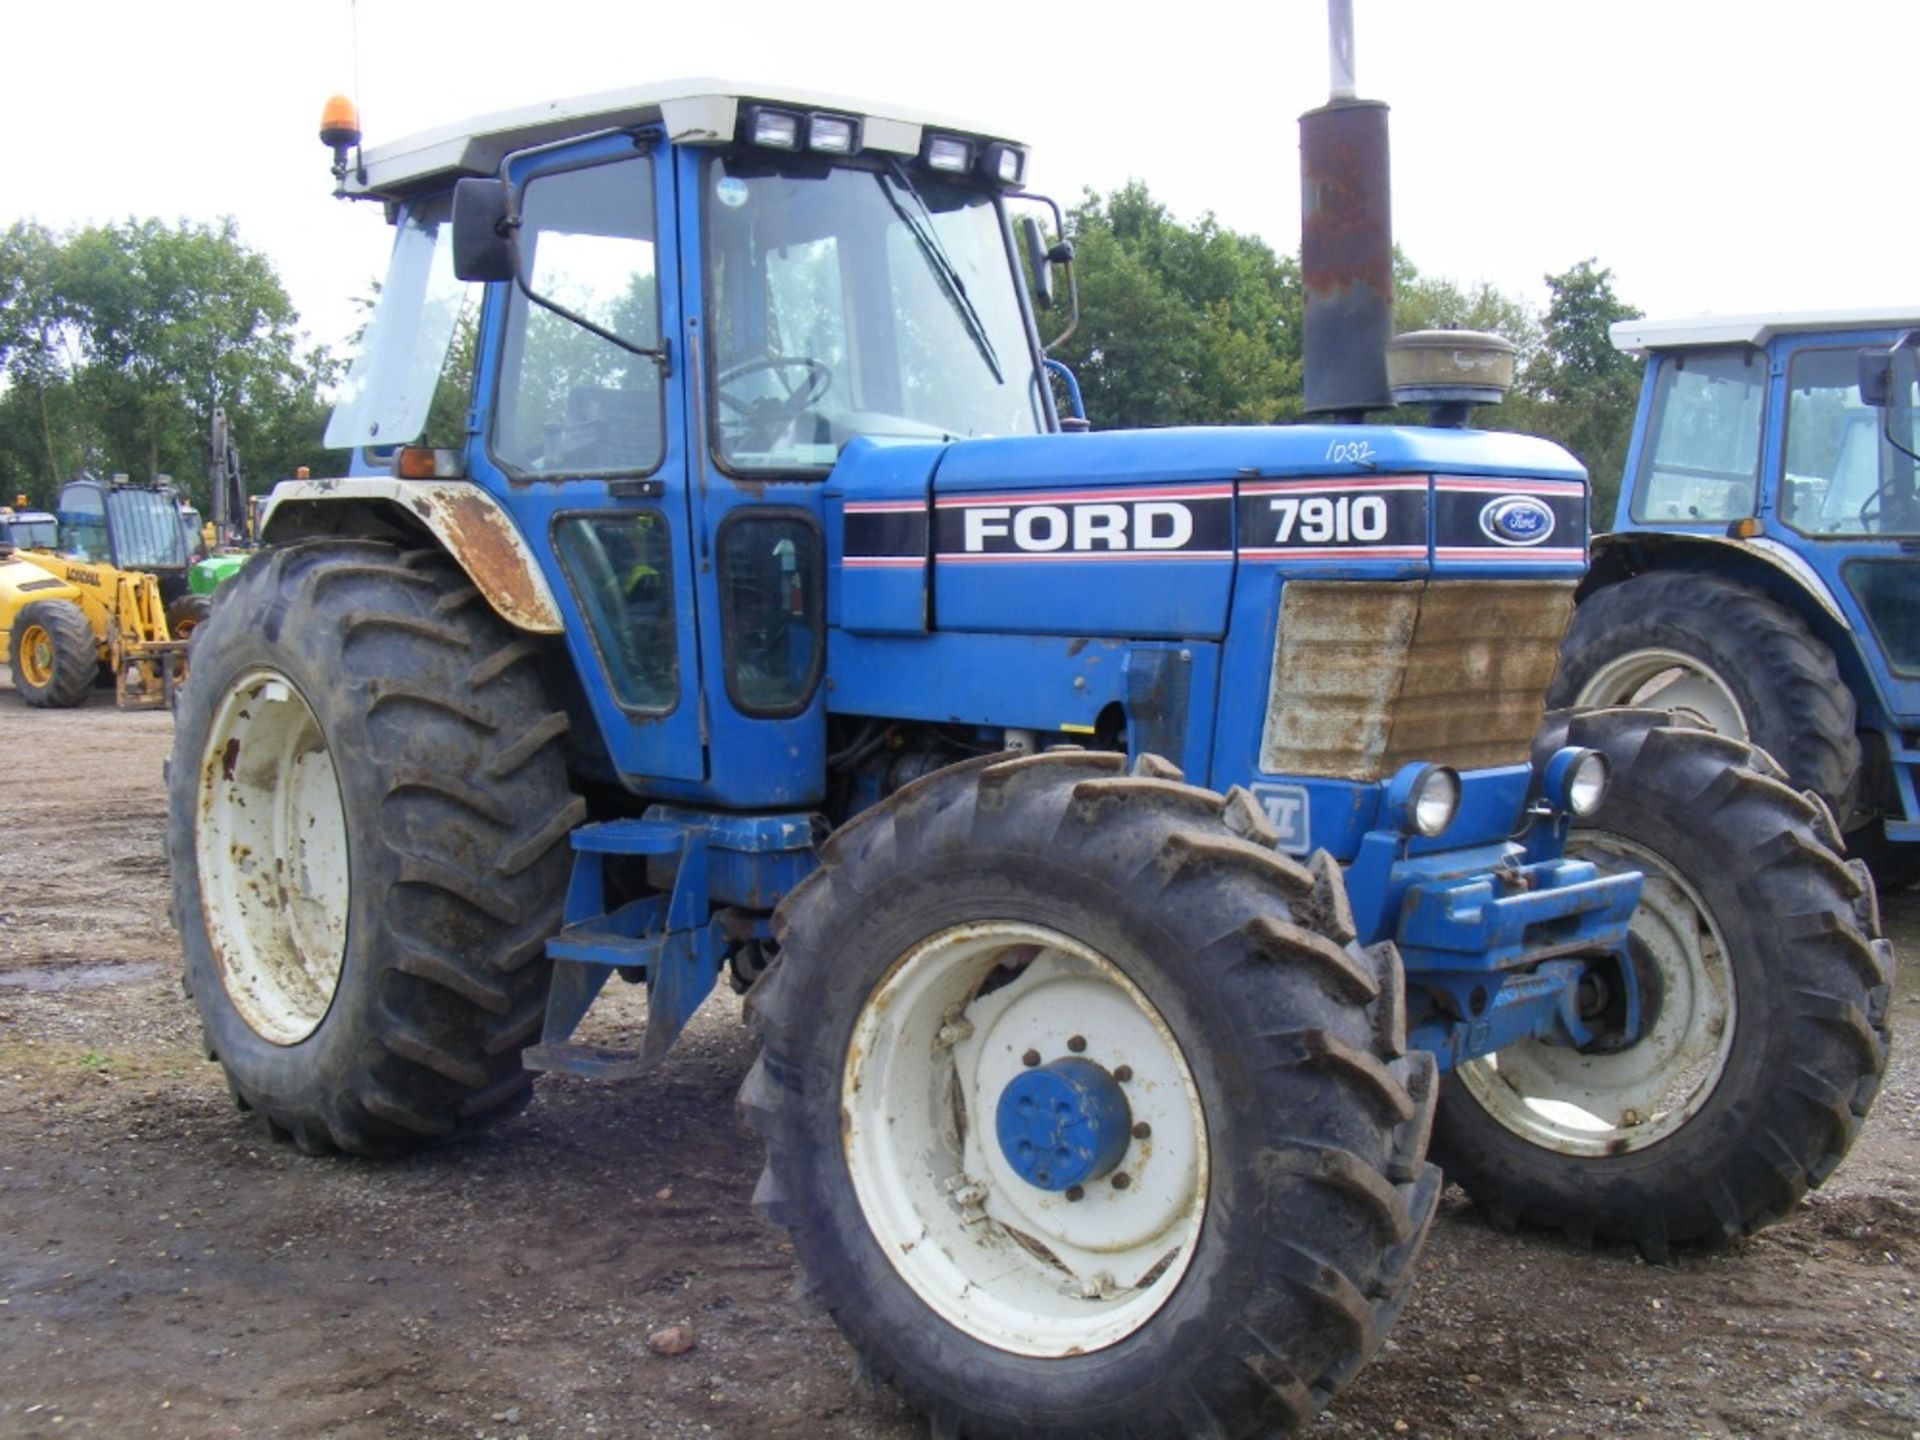 Ford 7910 Tractor with Super Q Cab - Image 3 of 3